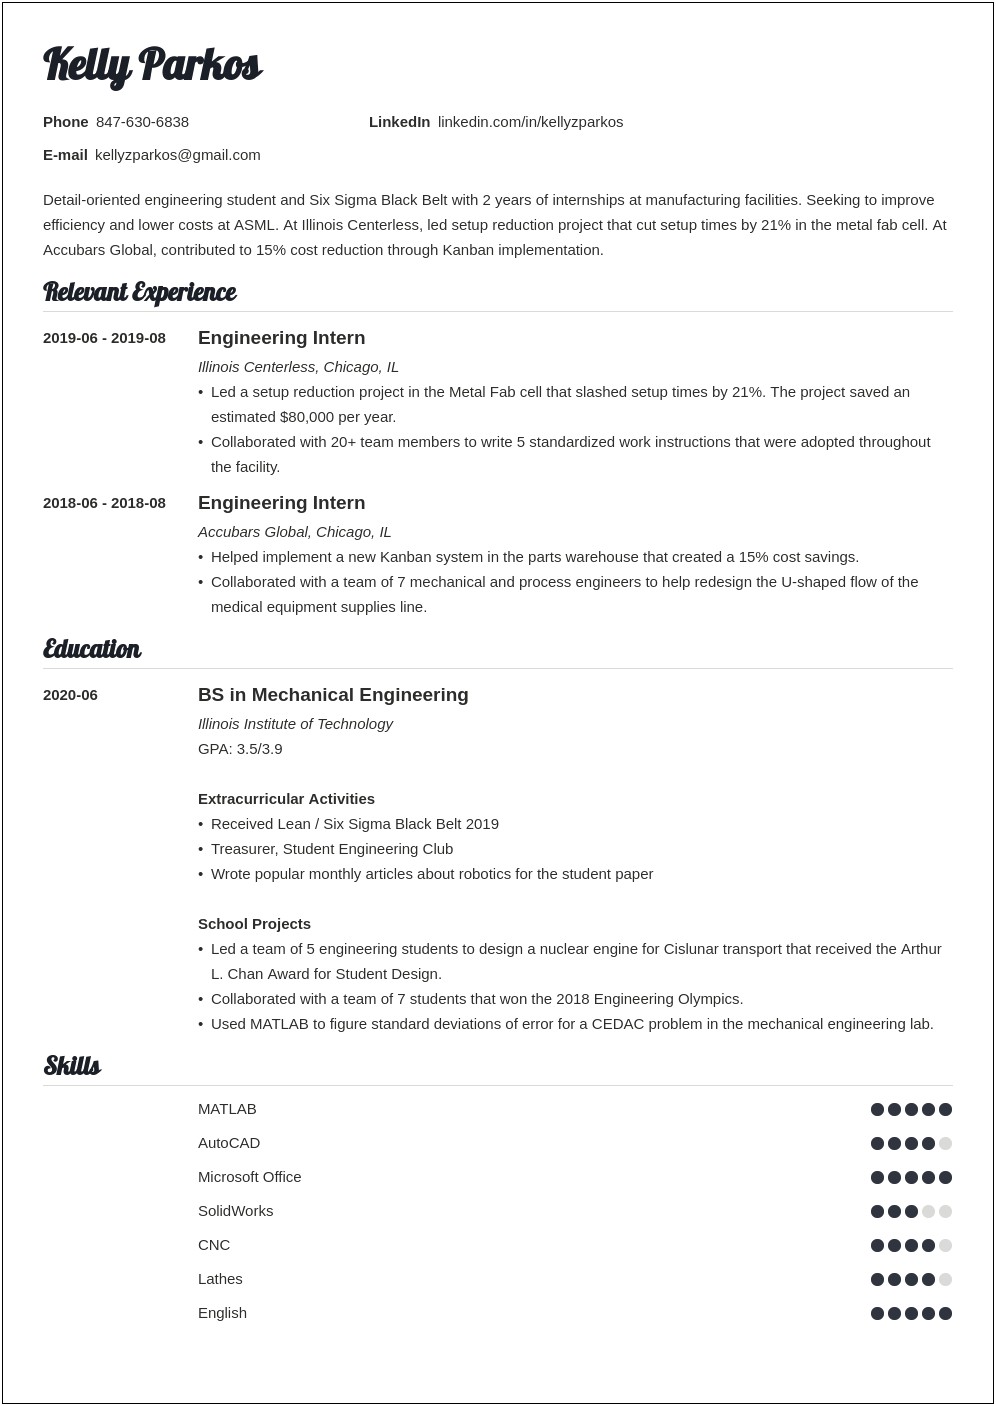 College Student Technical Skills For Resume